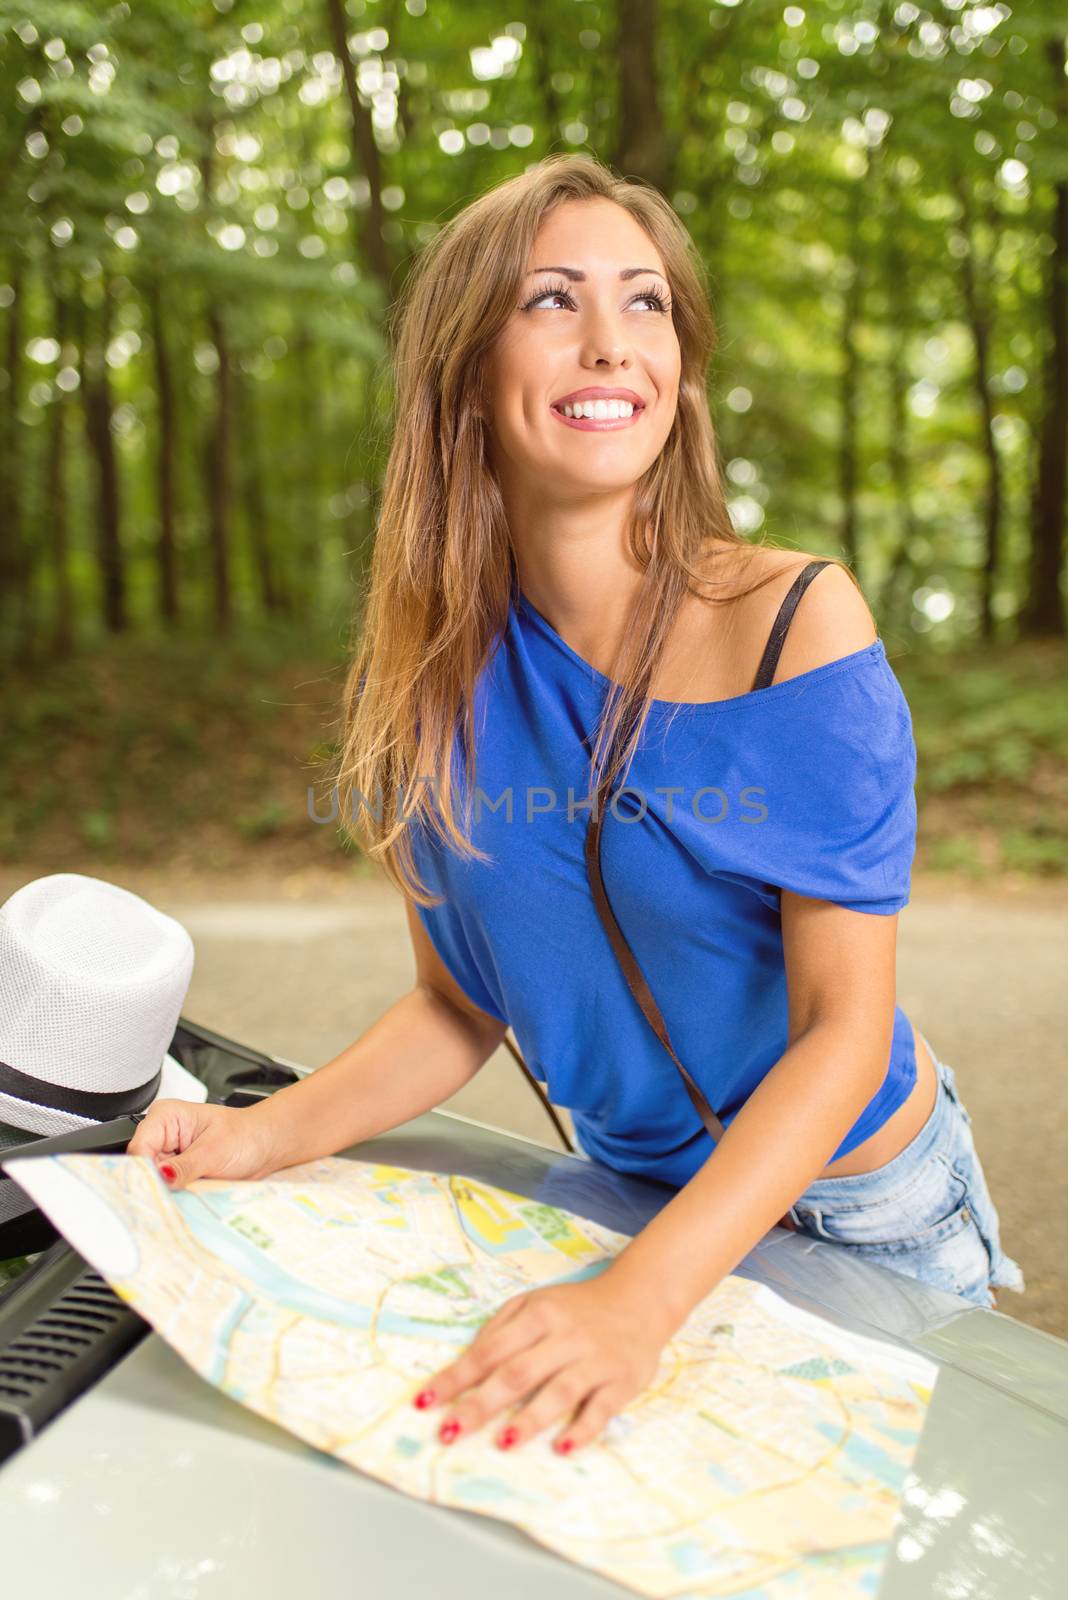 Young beautiful woman standing before a car in the forest, holding map and looking at destination.